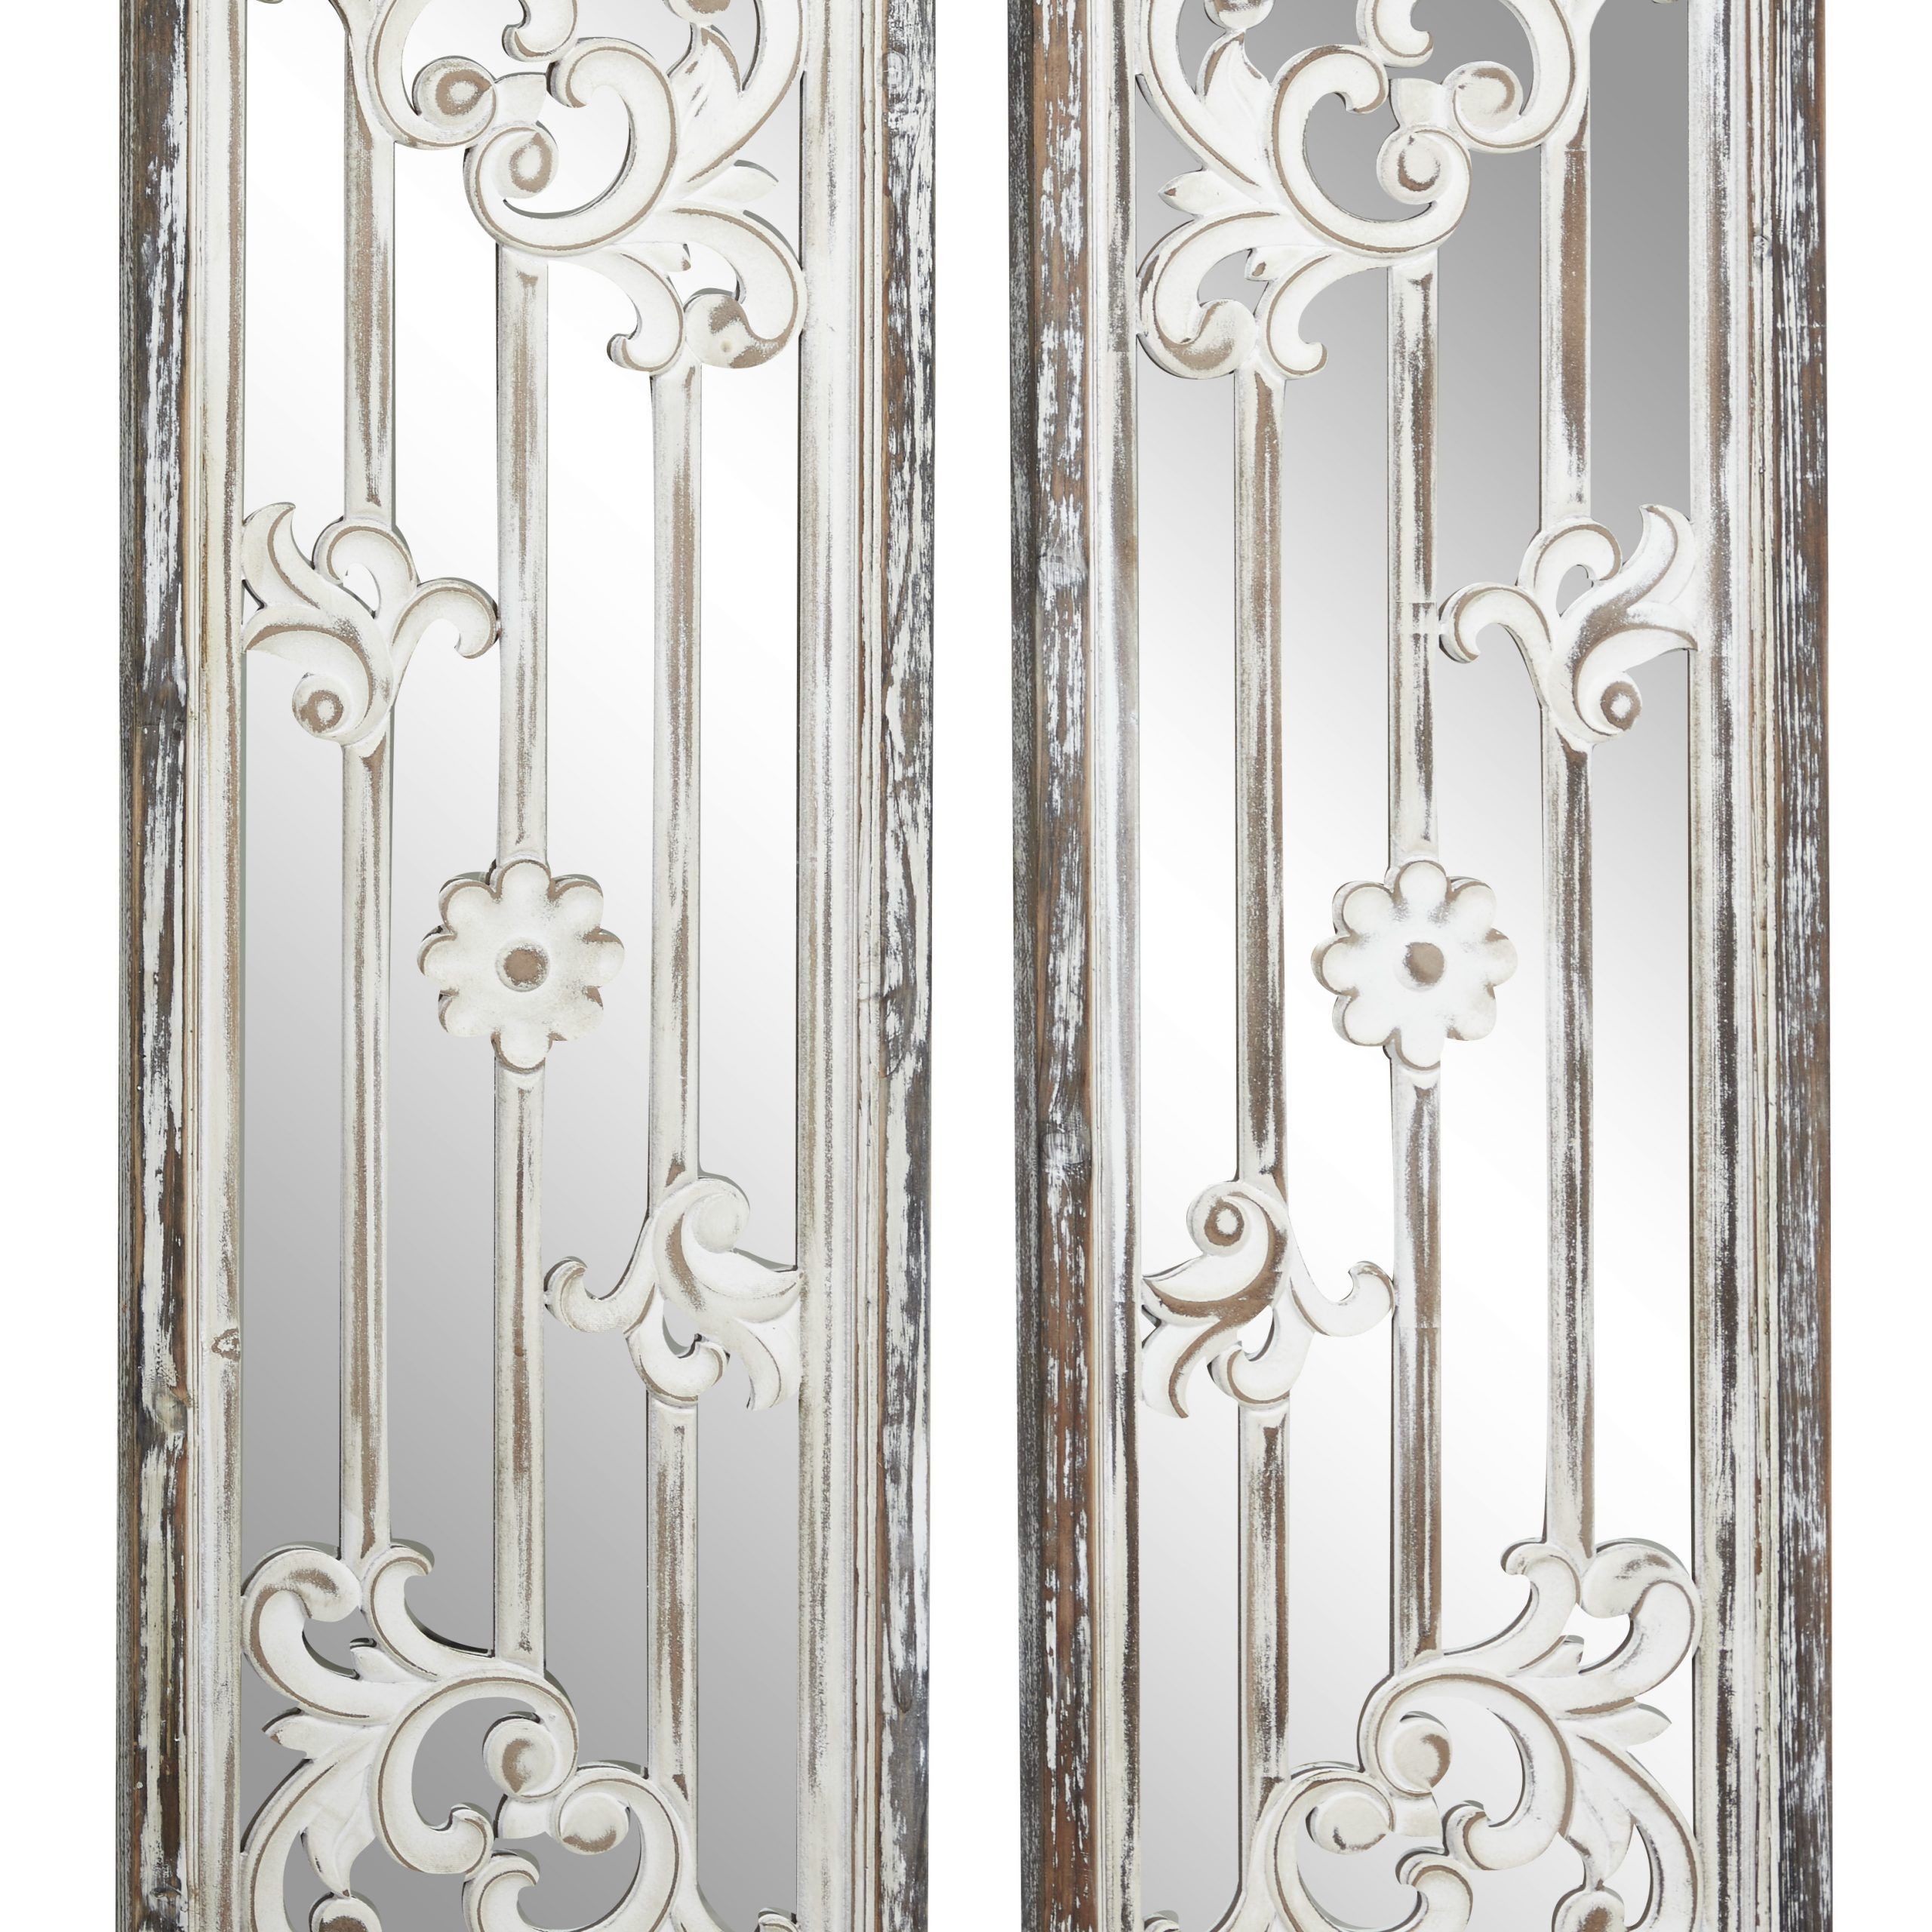 Decmode – Vintage Rectangular Wall Mirrors W/ Decorative Distressed Within White Wood Wall Mirrors (View 13 of 15)